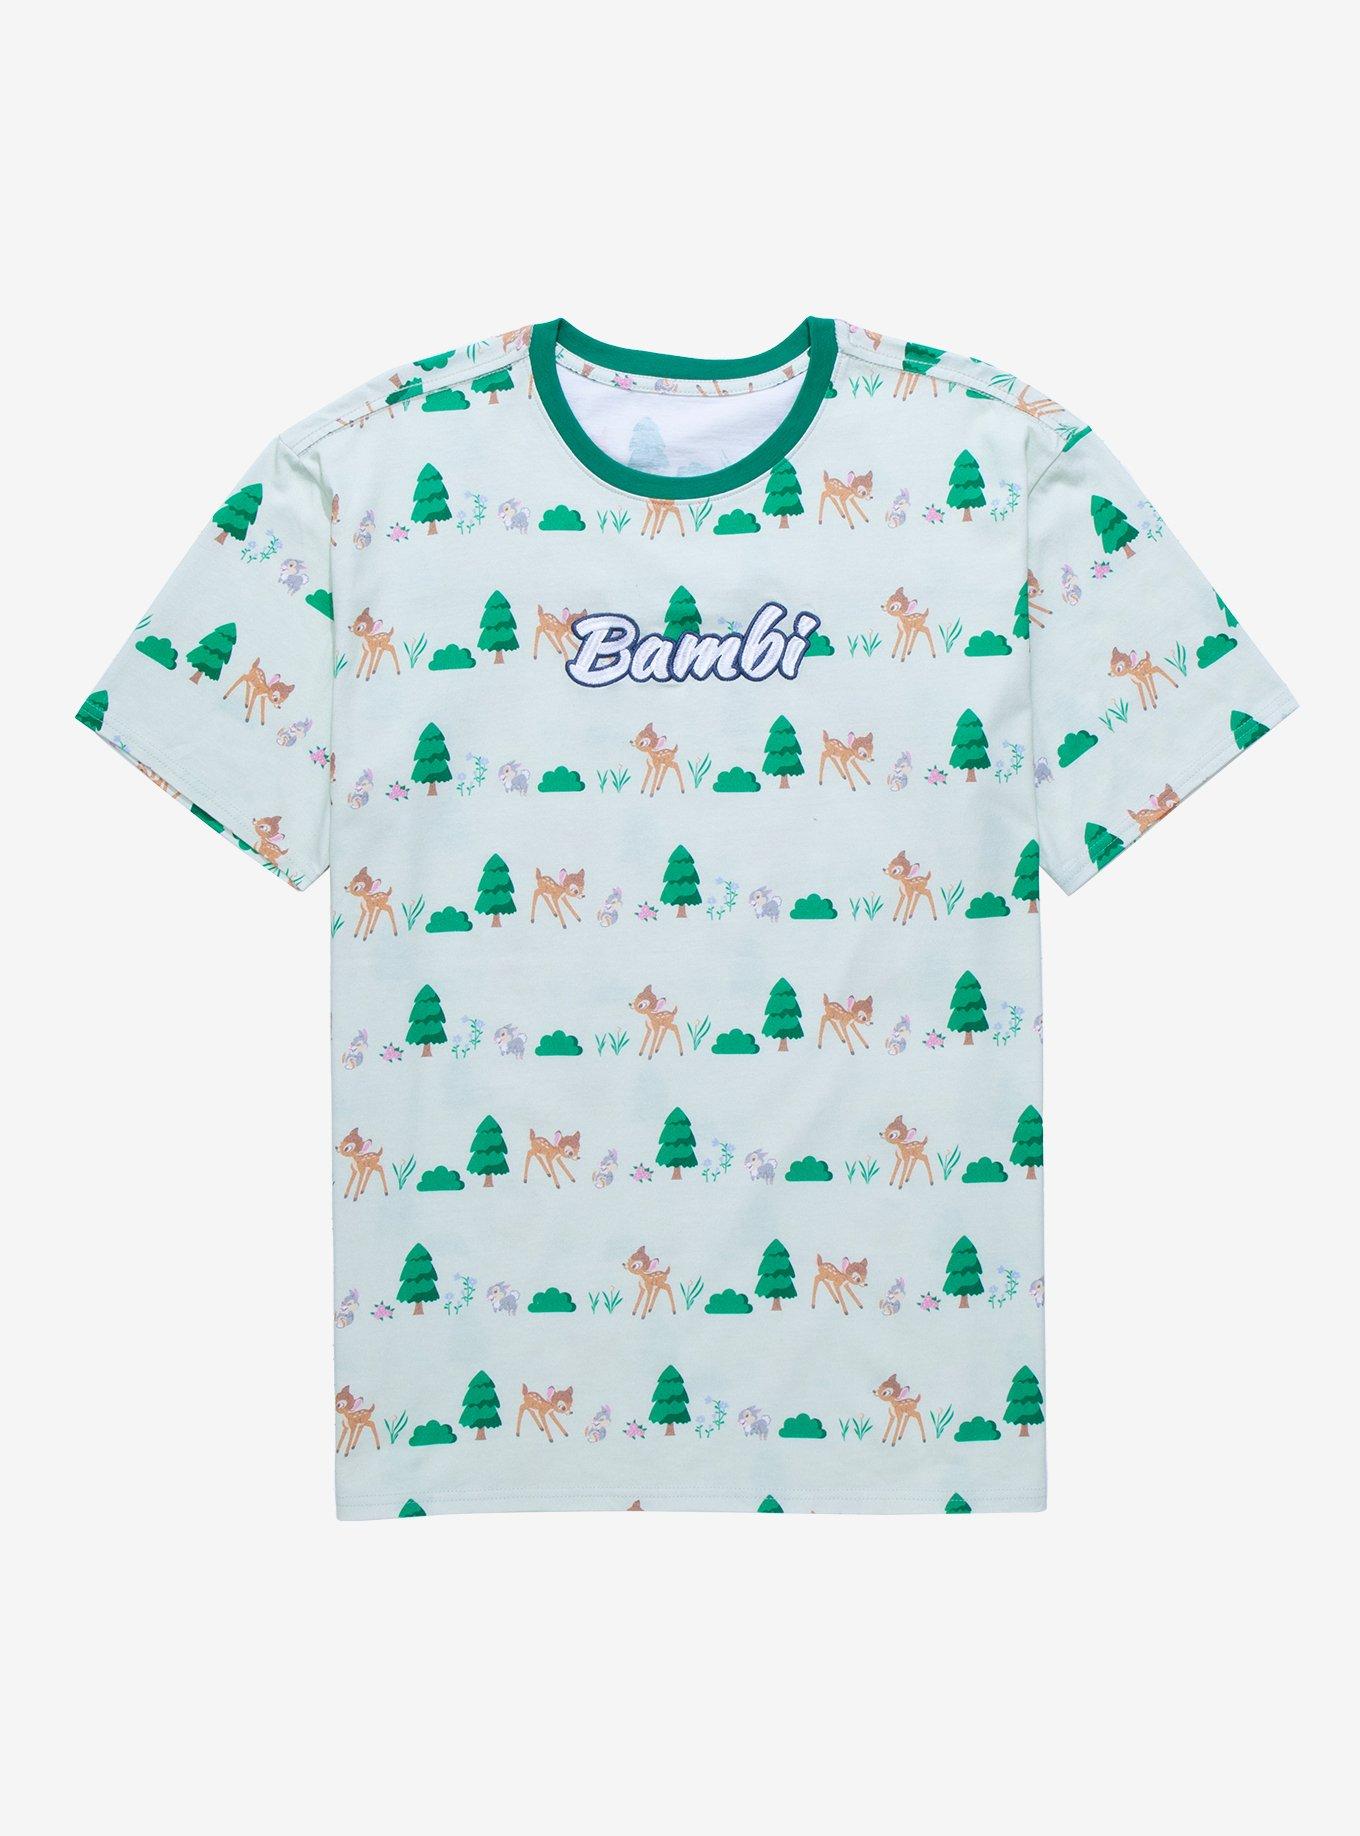 BoxLunch Forest Print Allover - Disney Bambi BoxLunch T-Shirt | Exclusive